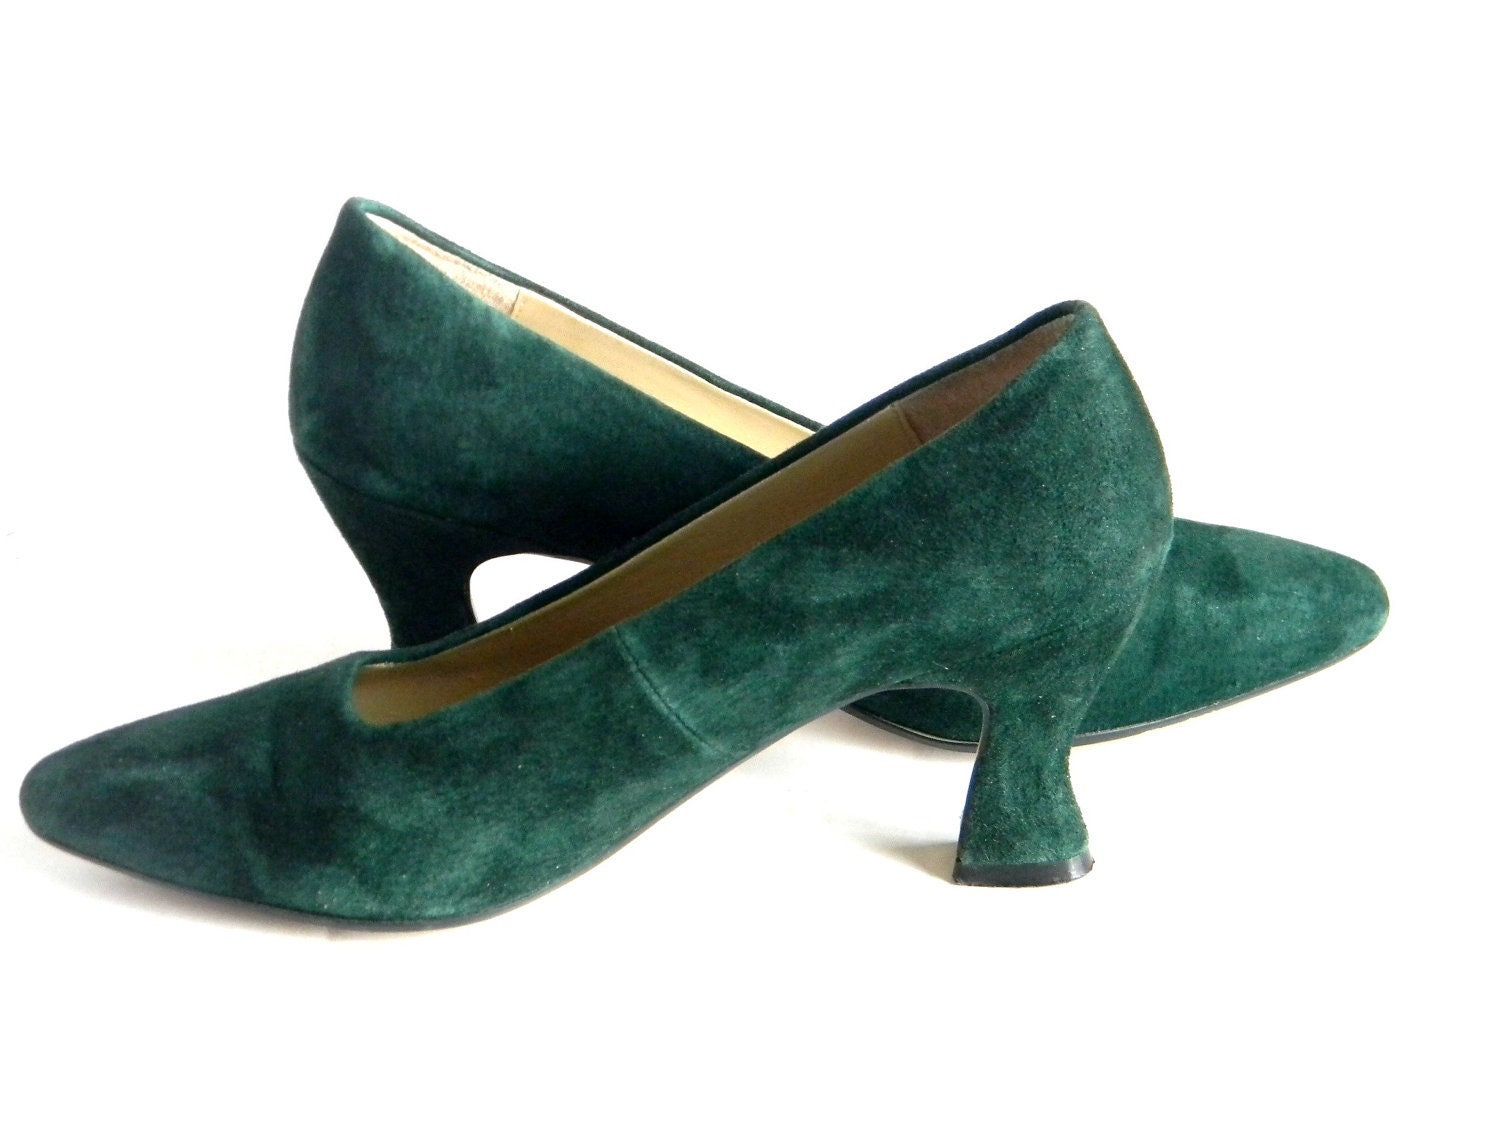 SALE Vintge Emerald  Green Suede Mid Heel  shoes  by 